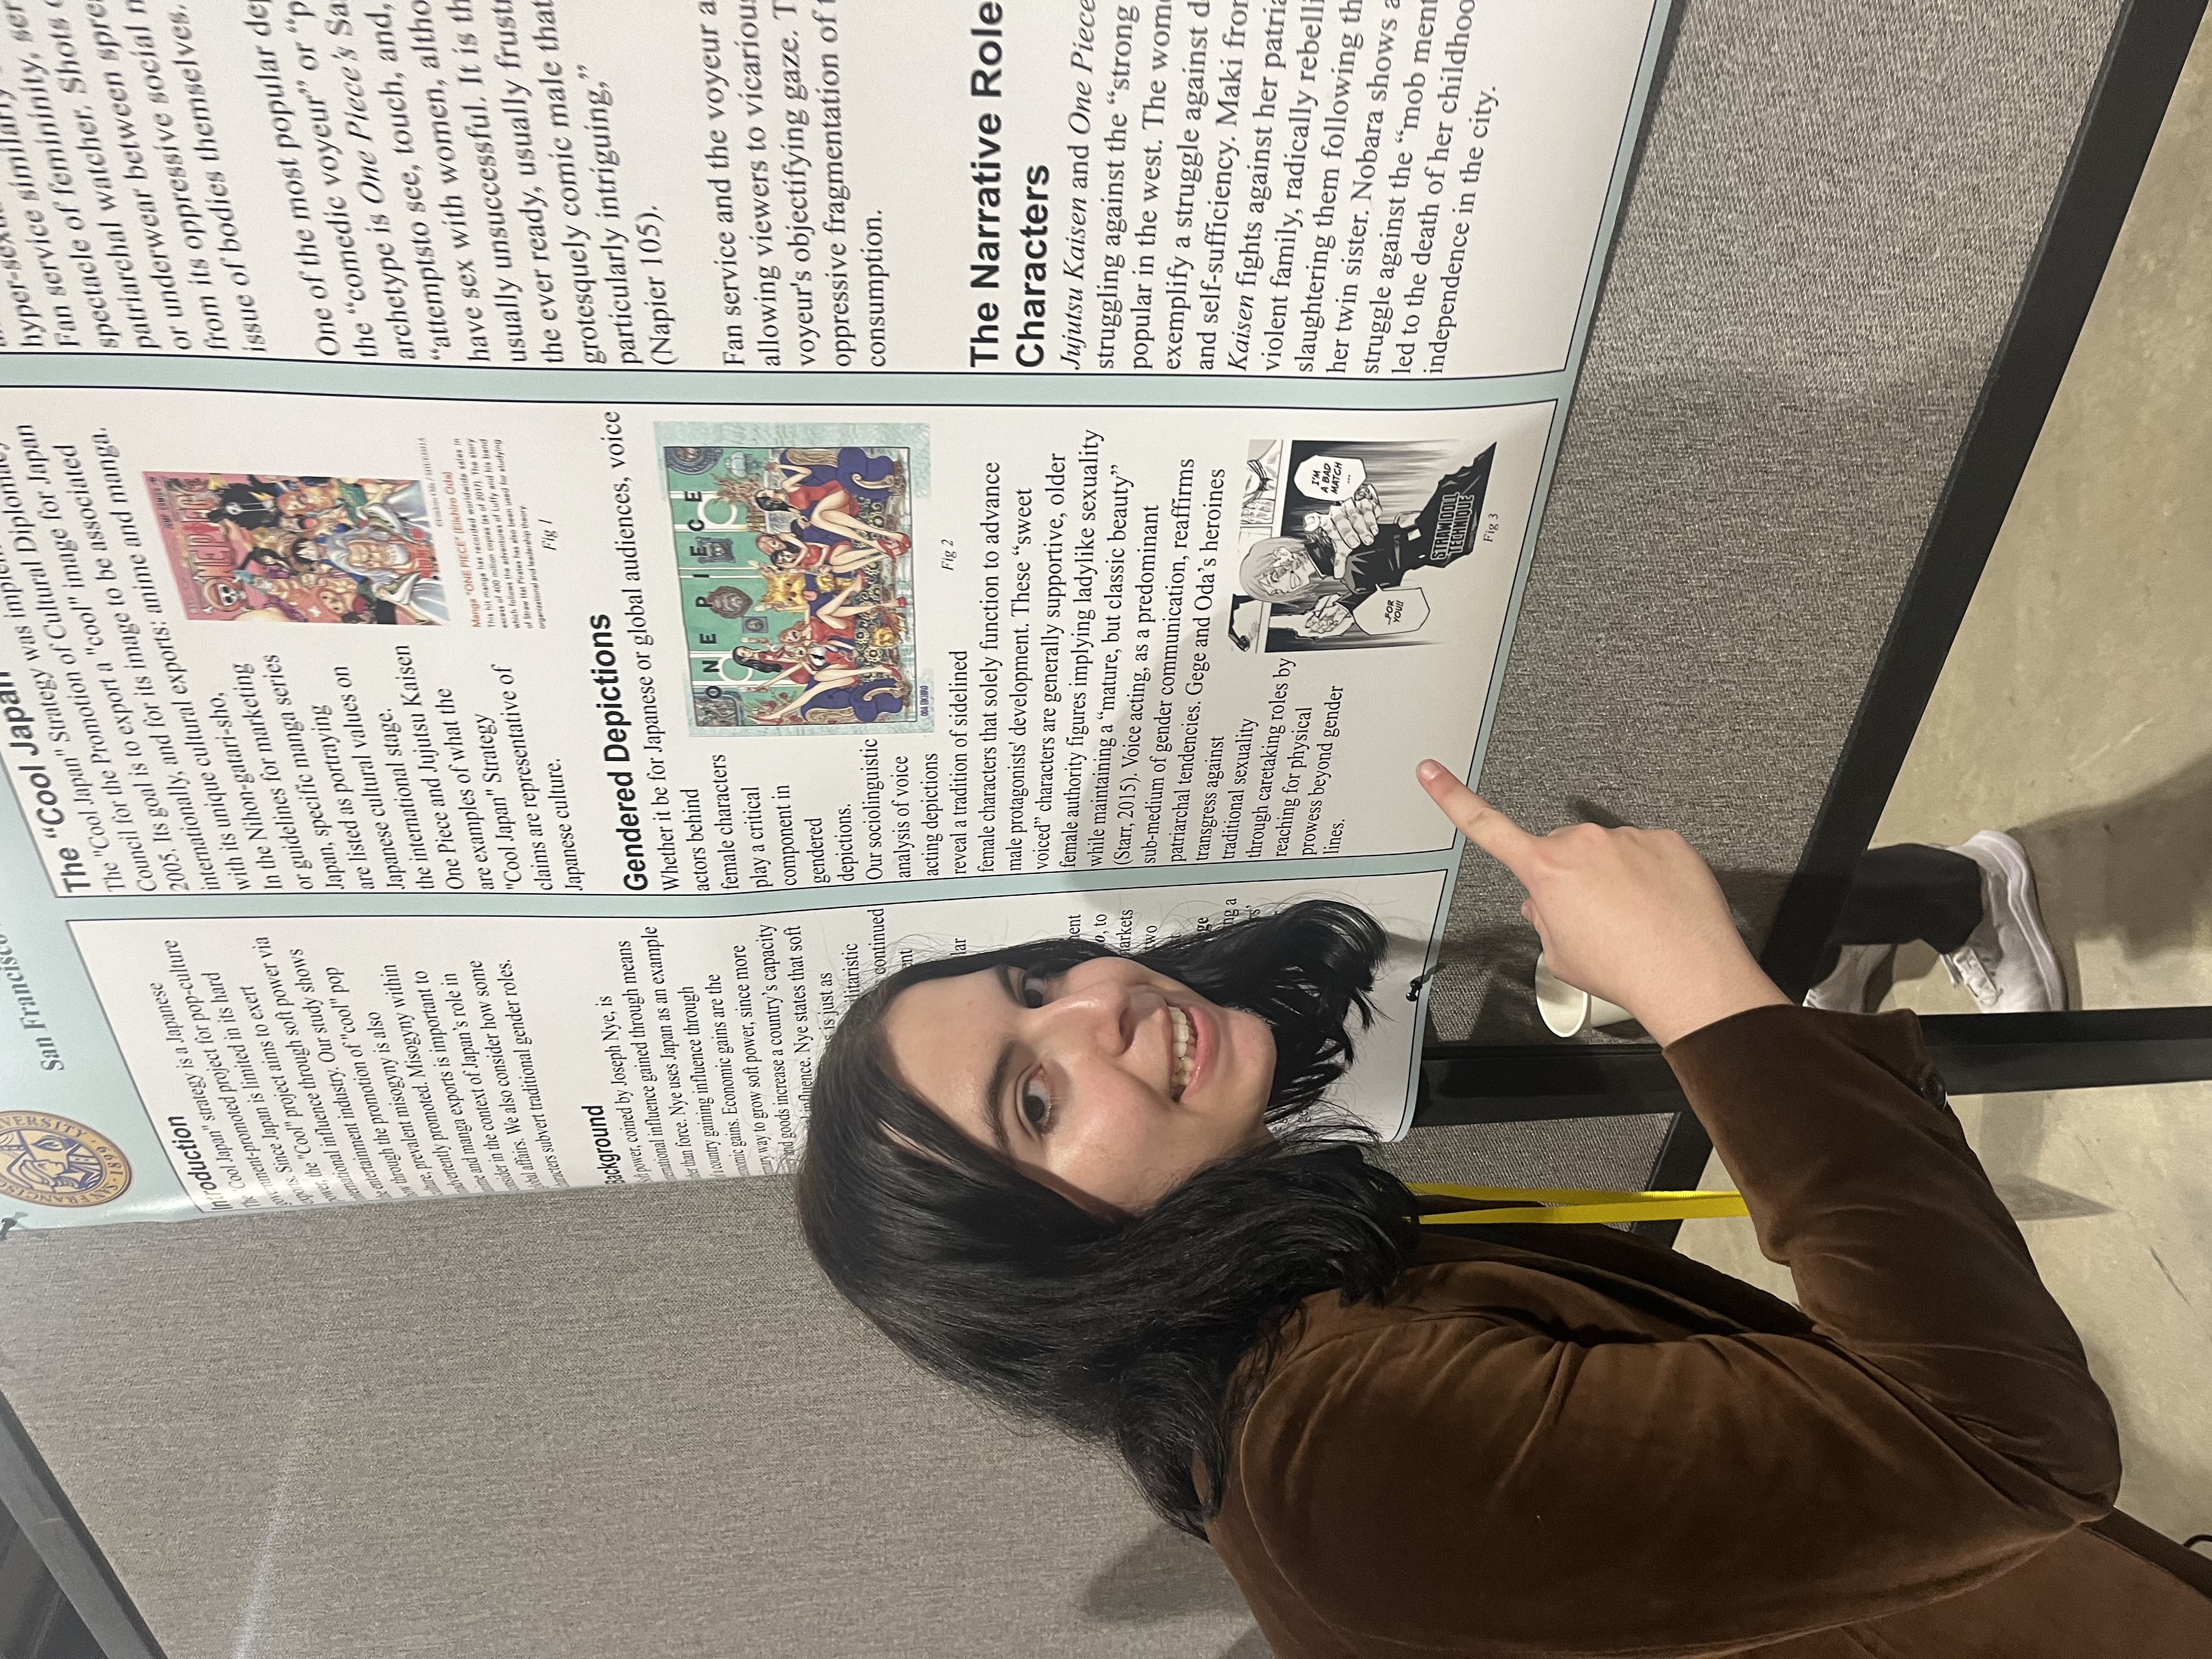 Tara Tara Shafie leans toward her poster. She is smiling and pointing at the content displayed there.